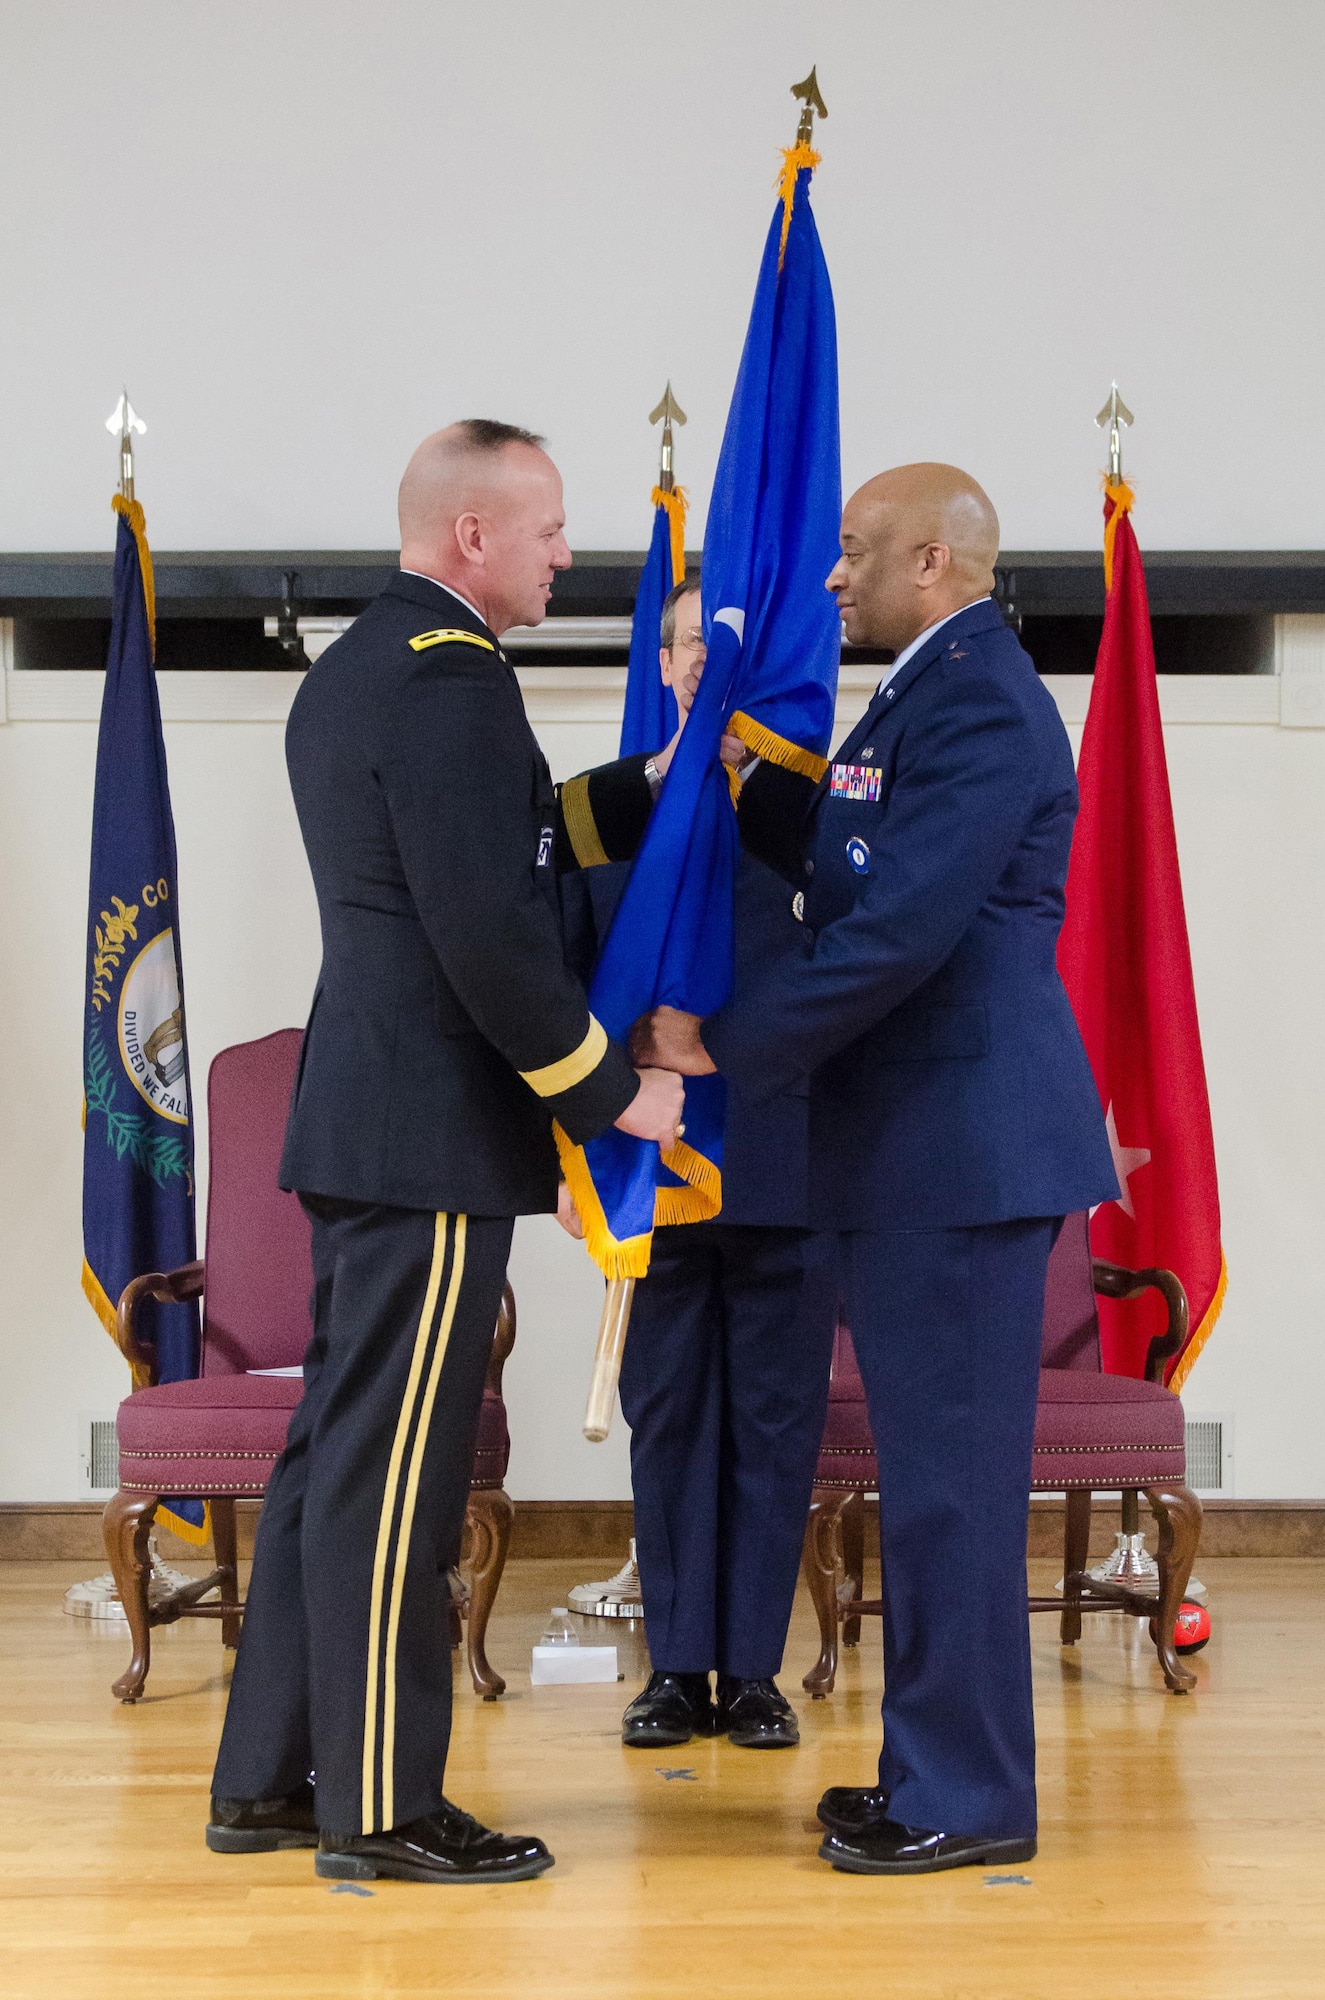 Army Maj. Gen. Steven R. Hogan (left), adjutant general of the Kentucky National Guard, presents the brigadier general flag to Charles M. Walker, chief of staff for Headquarters, Kentucky Air National Guard, during Walker’s promotion ceremony at the Kentucky Air National Guard base in Louisville, Ky., Nov. 4, 2017. (U.S. Air National Guard photo by Tech. Sgt. Vicky Spesard)